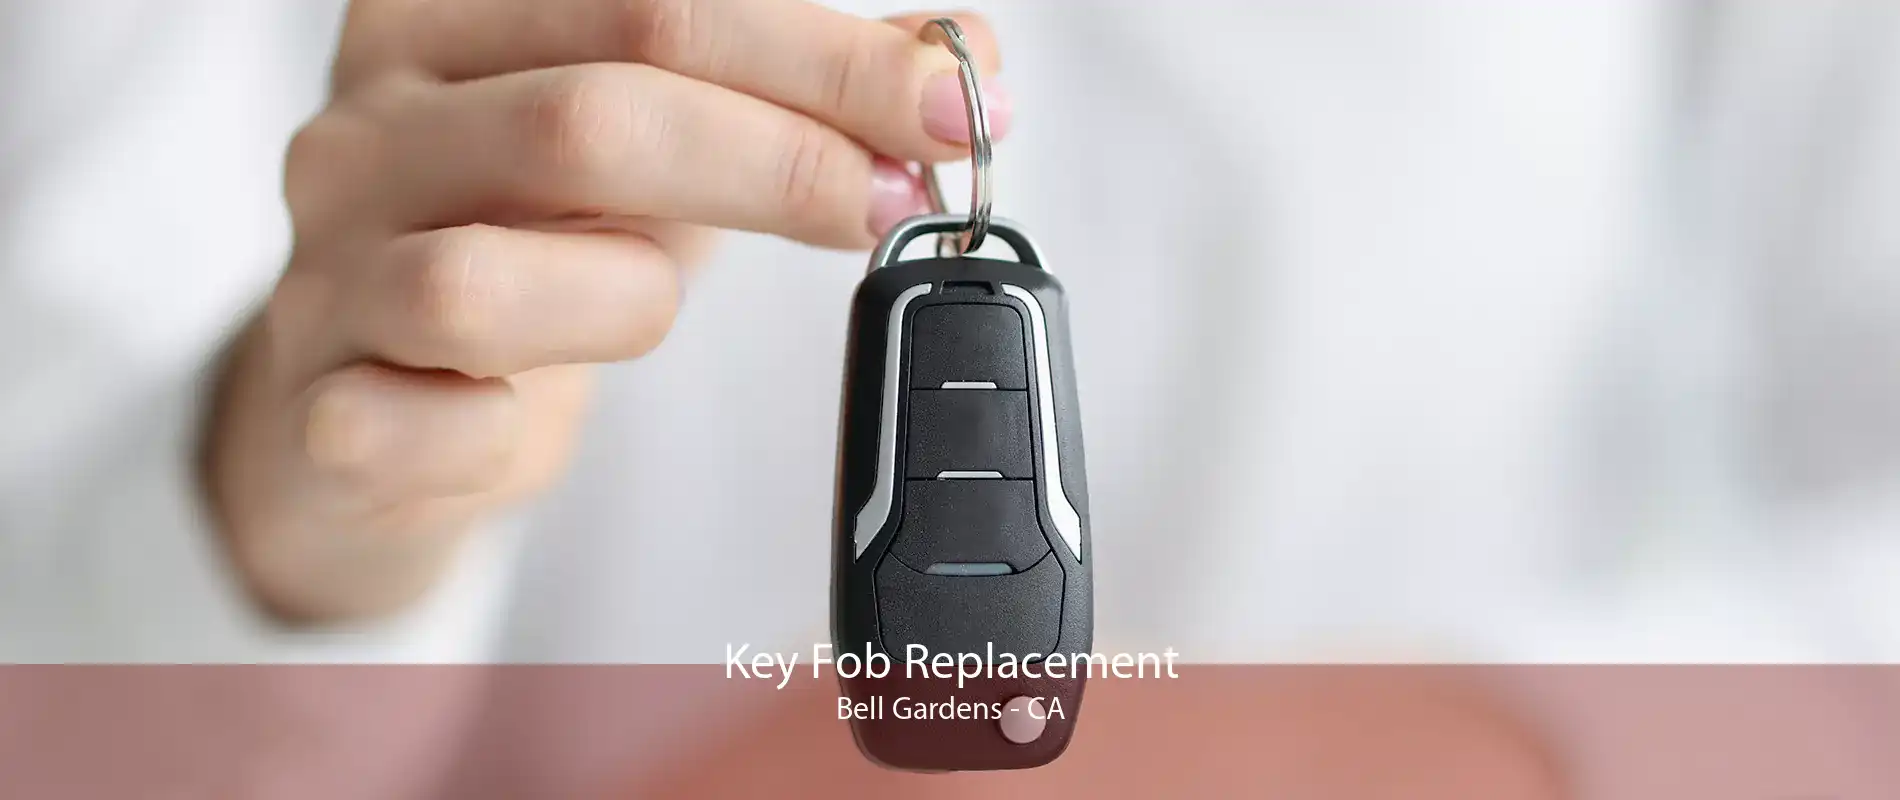 Key Fob Replacement Bell Gardens - CA